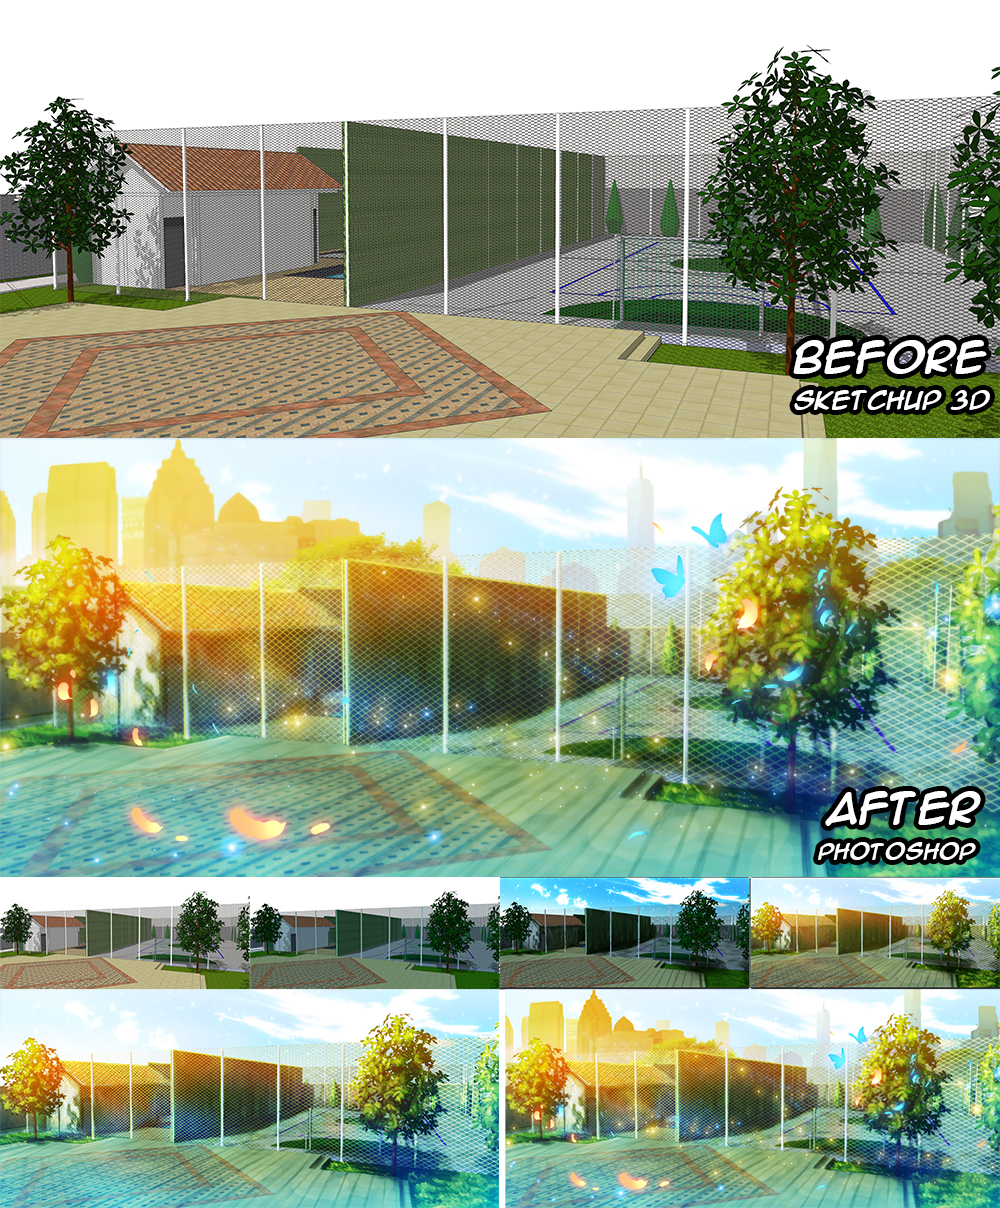 ANIME BACKGROUND FROM SKETCHUP by zeronol on DeviantArt